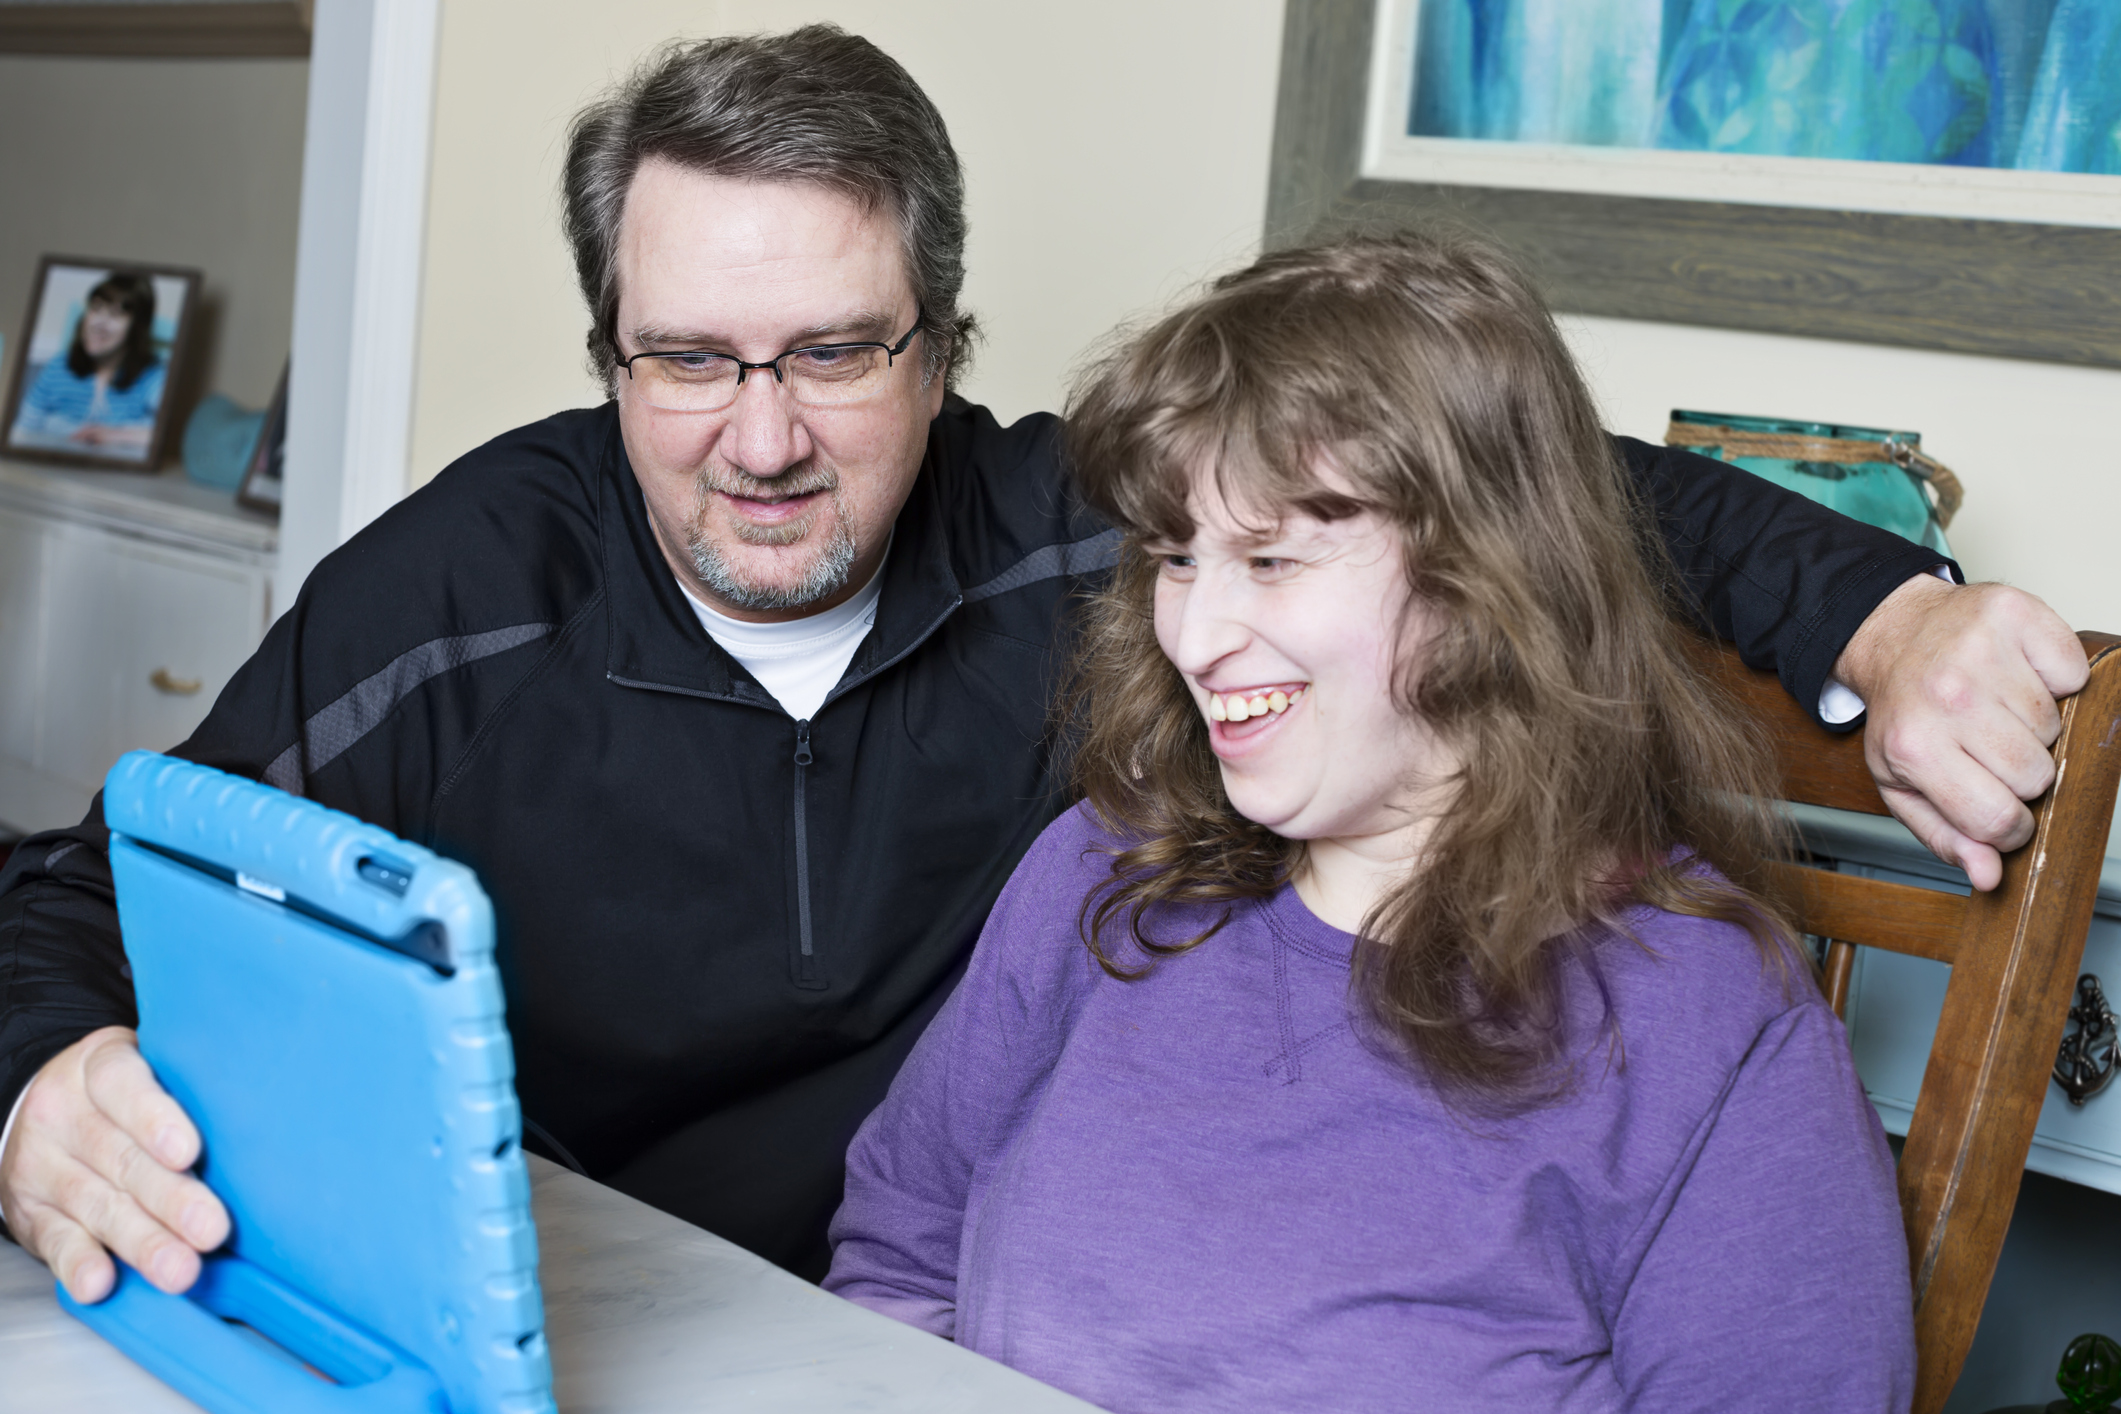 Father and daughter looking at a digital tablet